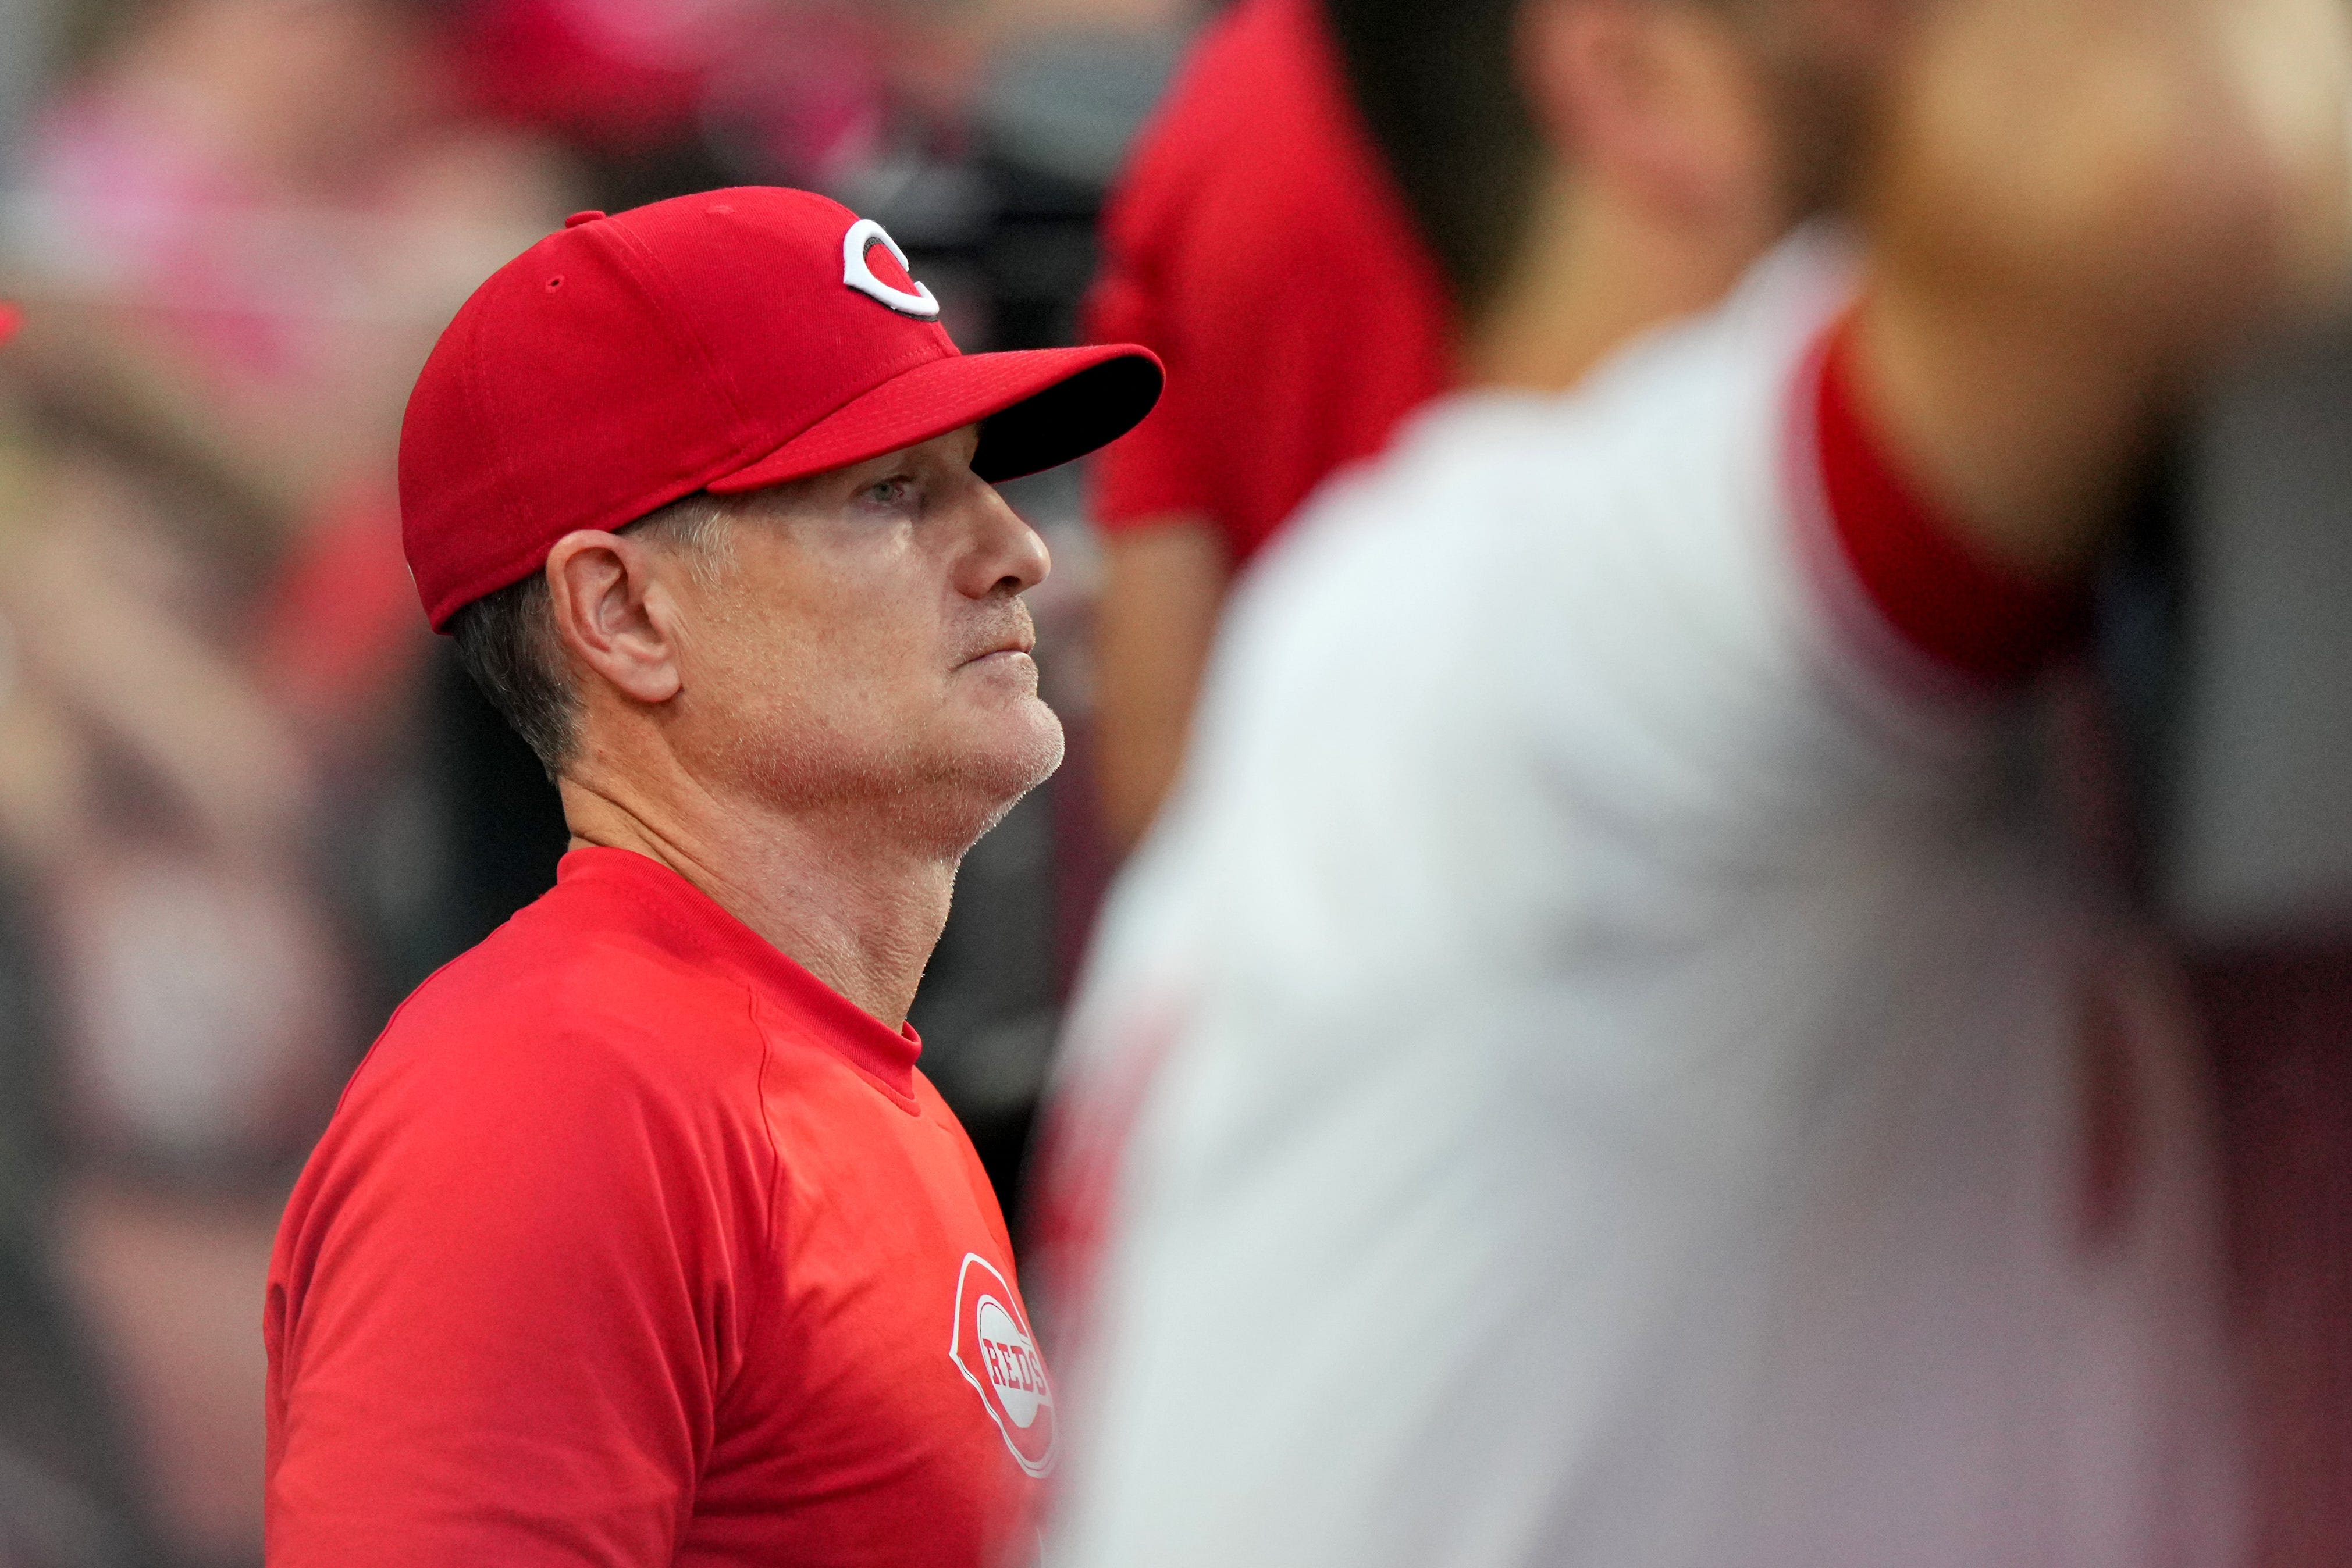 Cincinnati Reds manager David Bell sidesteps Pete Rose question: 'Not where my mind is'